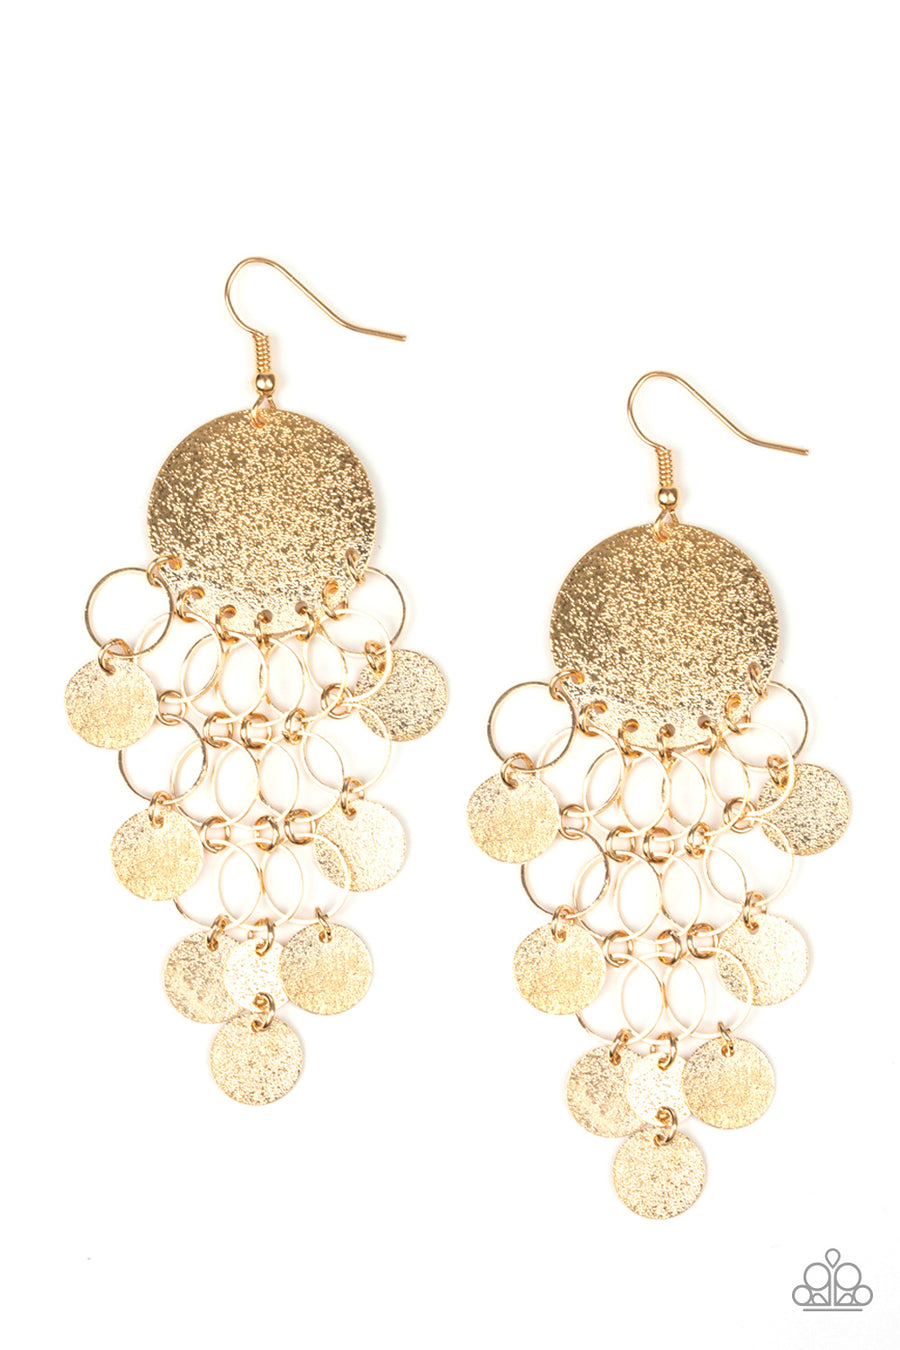 Turn On The Brights -  Gold Cascading Disc Earrings - Paparazzi Accessories